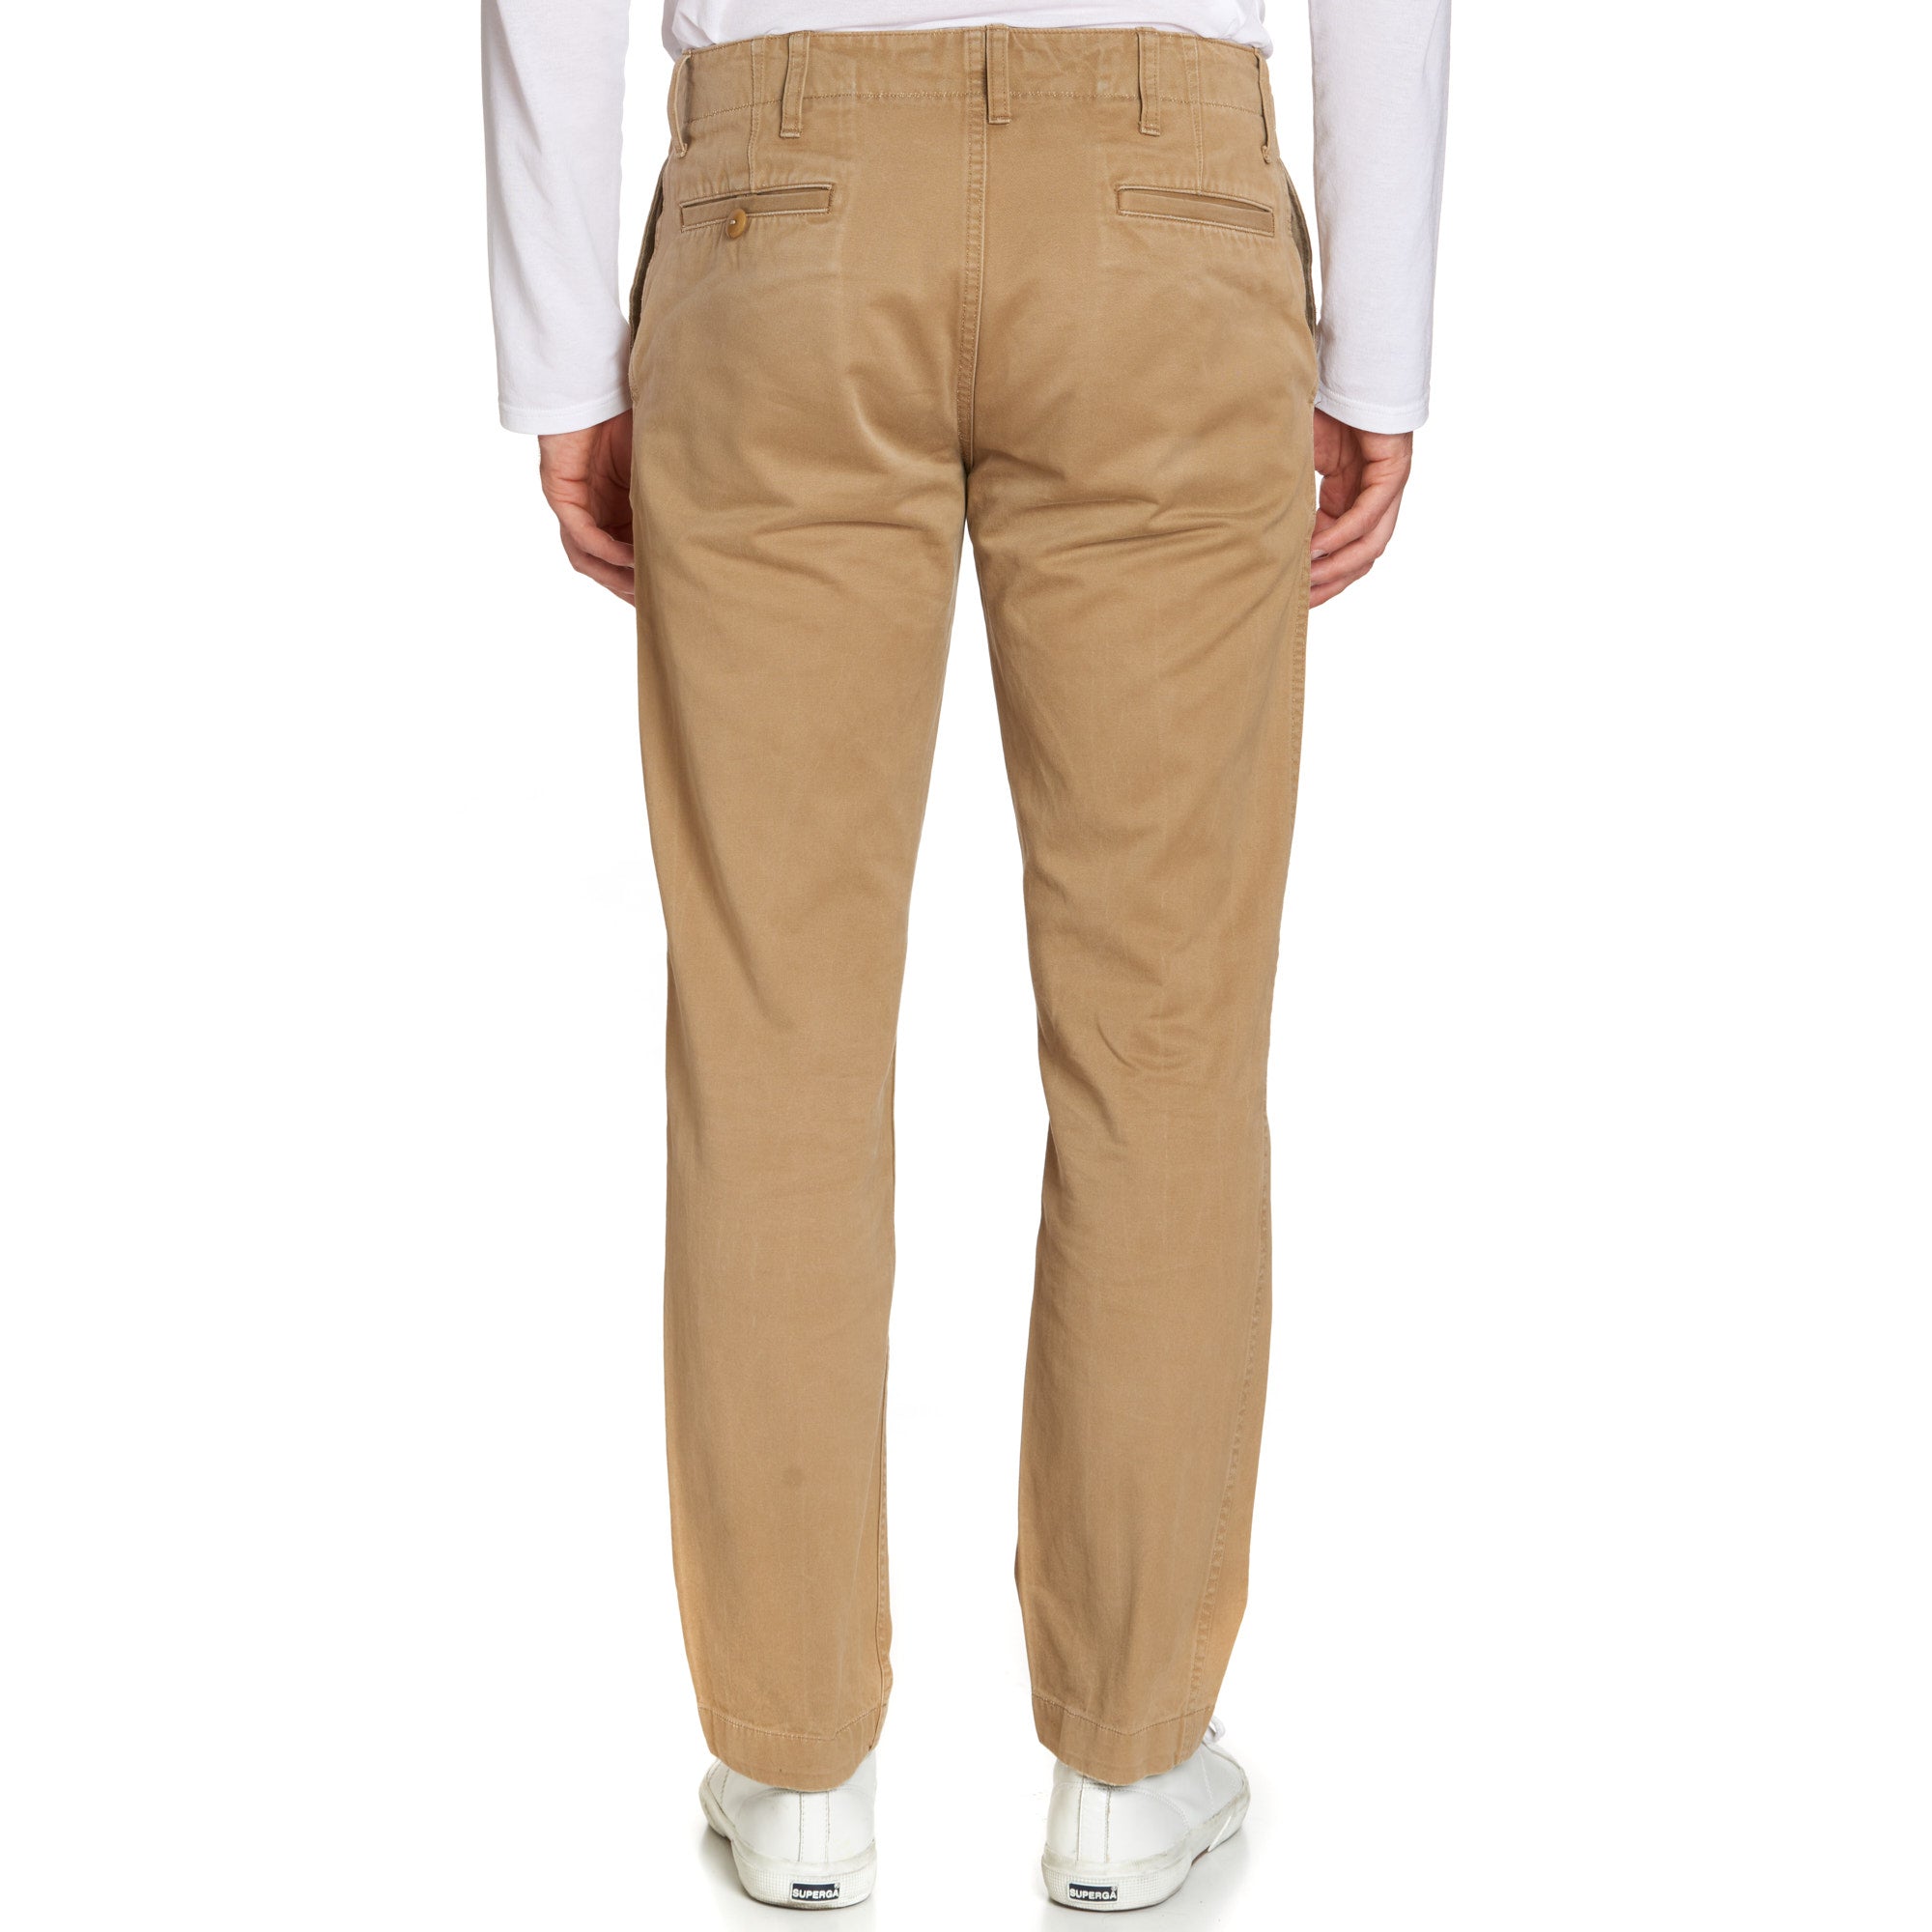 NIGEL CABOURN Tan Cotton Officer's Chino Pants US 33 34 Slim Fit Japan NIGEL CABOURN